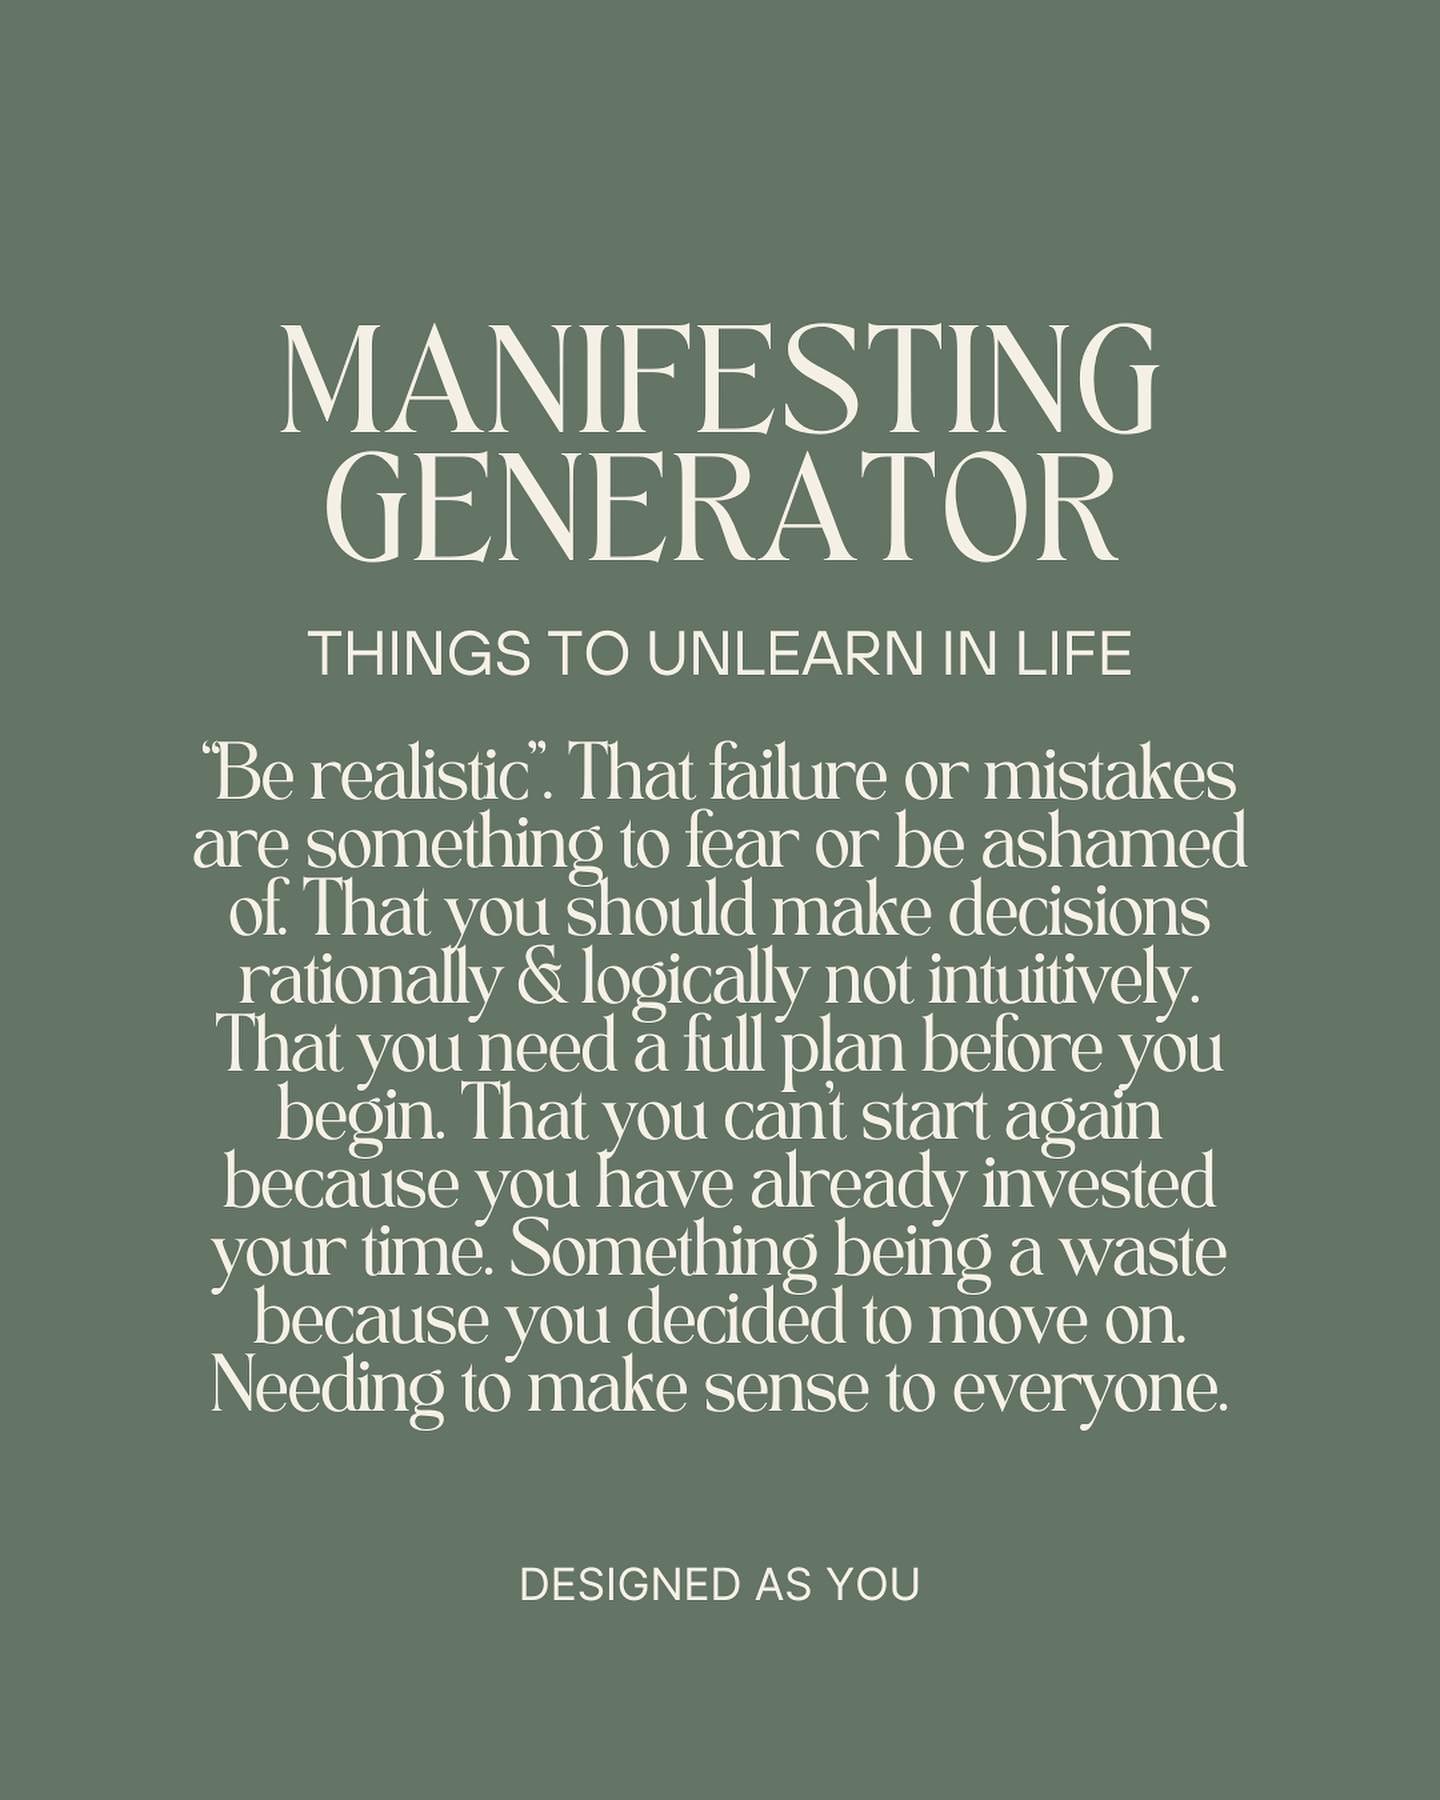 THINGS WE NEED TO UNLEARN IN LIFE Aka Deconditioning (&amp; there are plenty of them).&nbsp;

Deconditioning is letting go of all the ways you are not truly yourself. It is identifying &amp; unlearning the conditioned beliefs, cultural expectations t